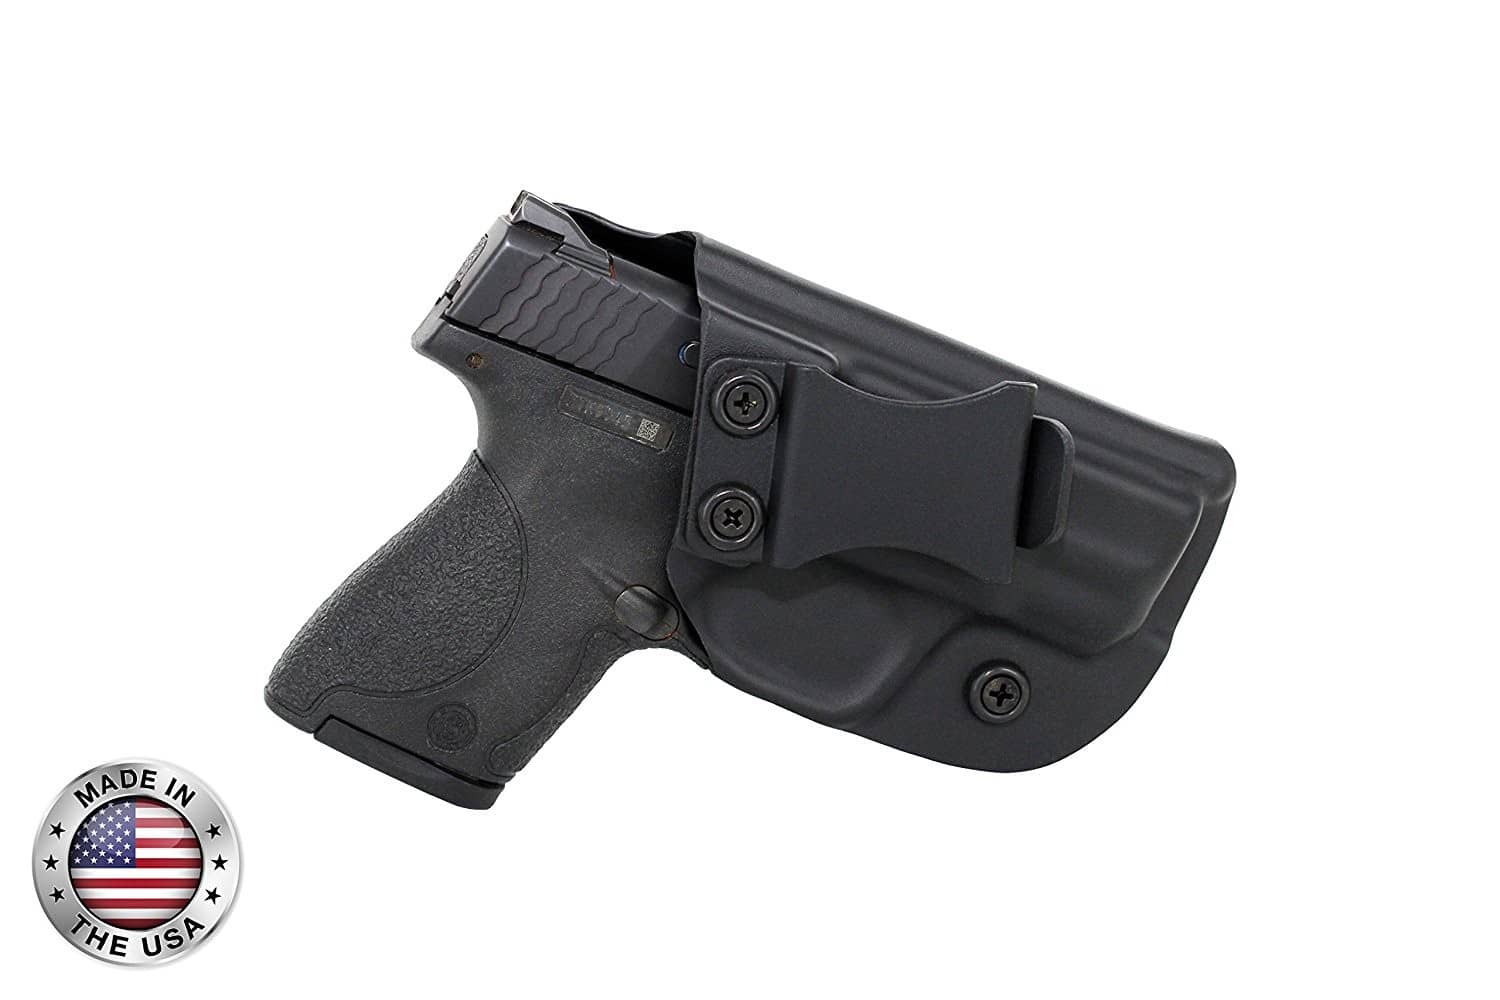 Everyday Holsters IWB Kydex Concealed Carry Holsters